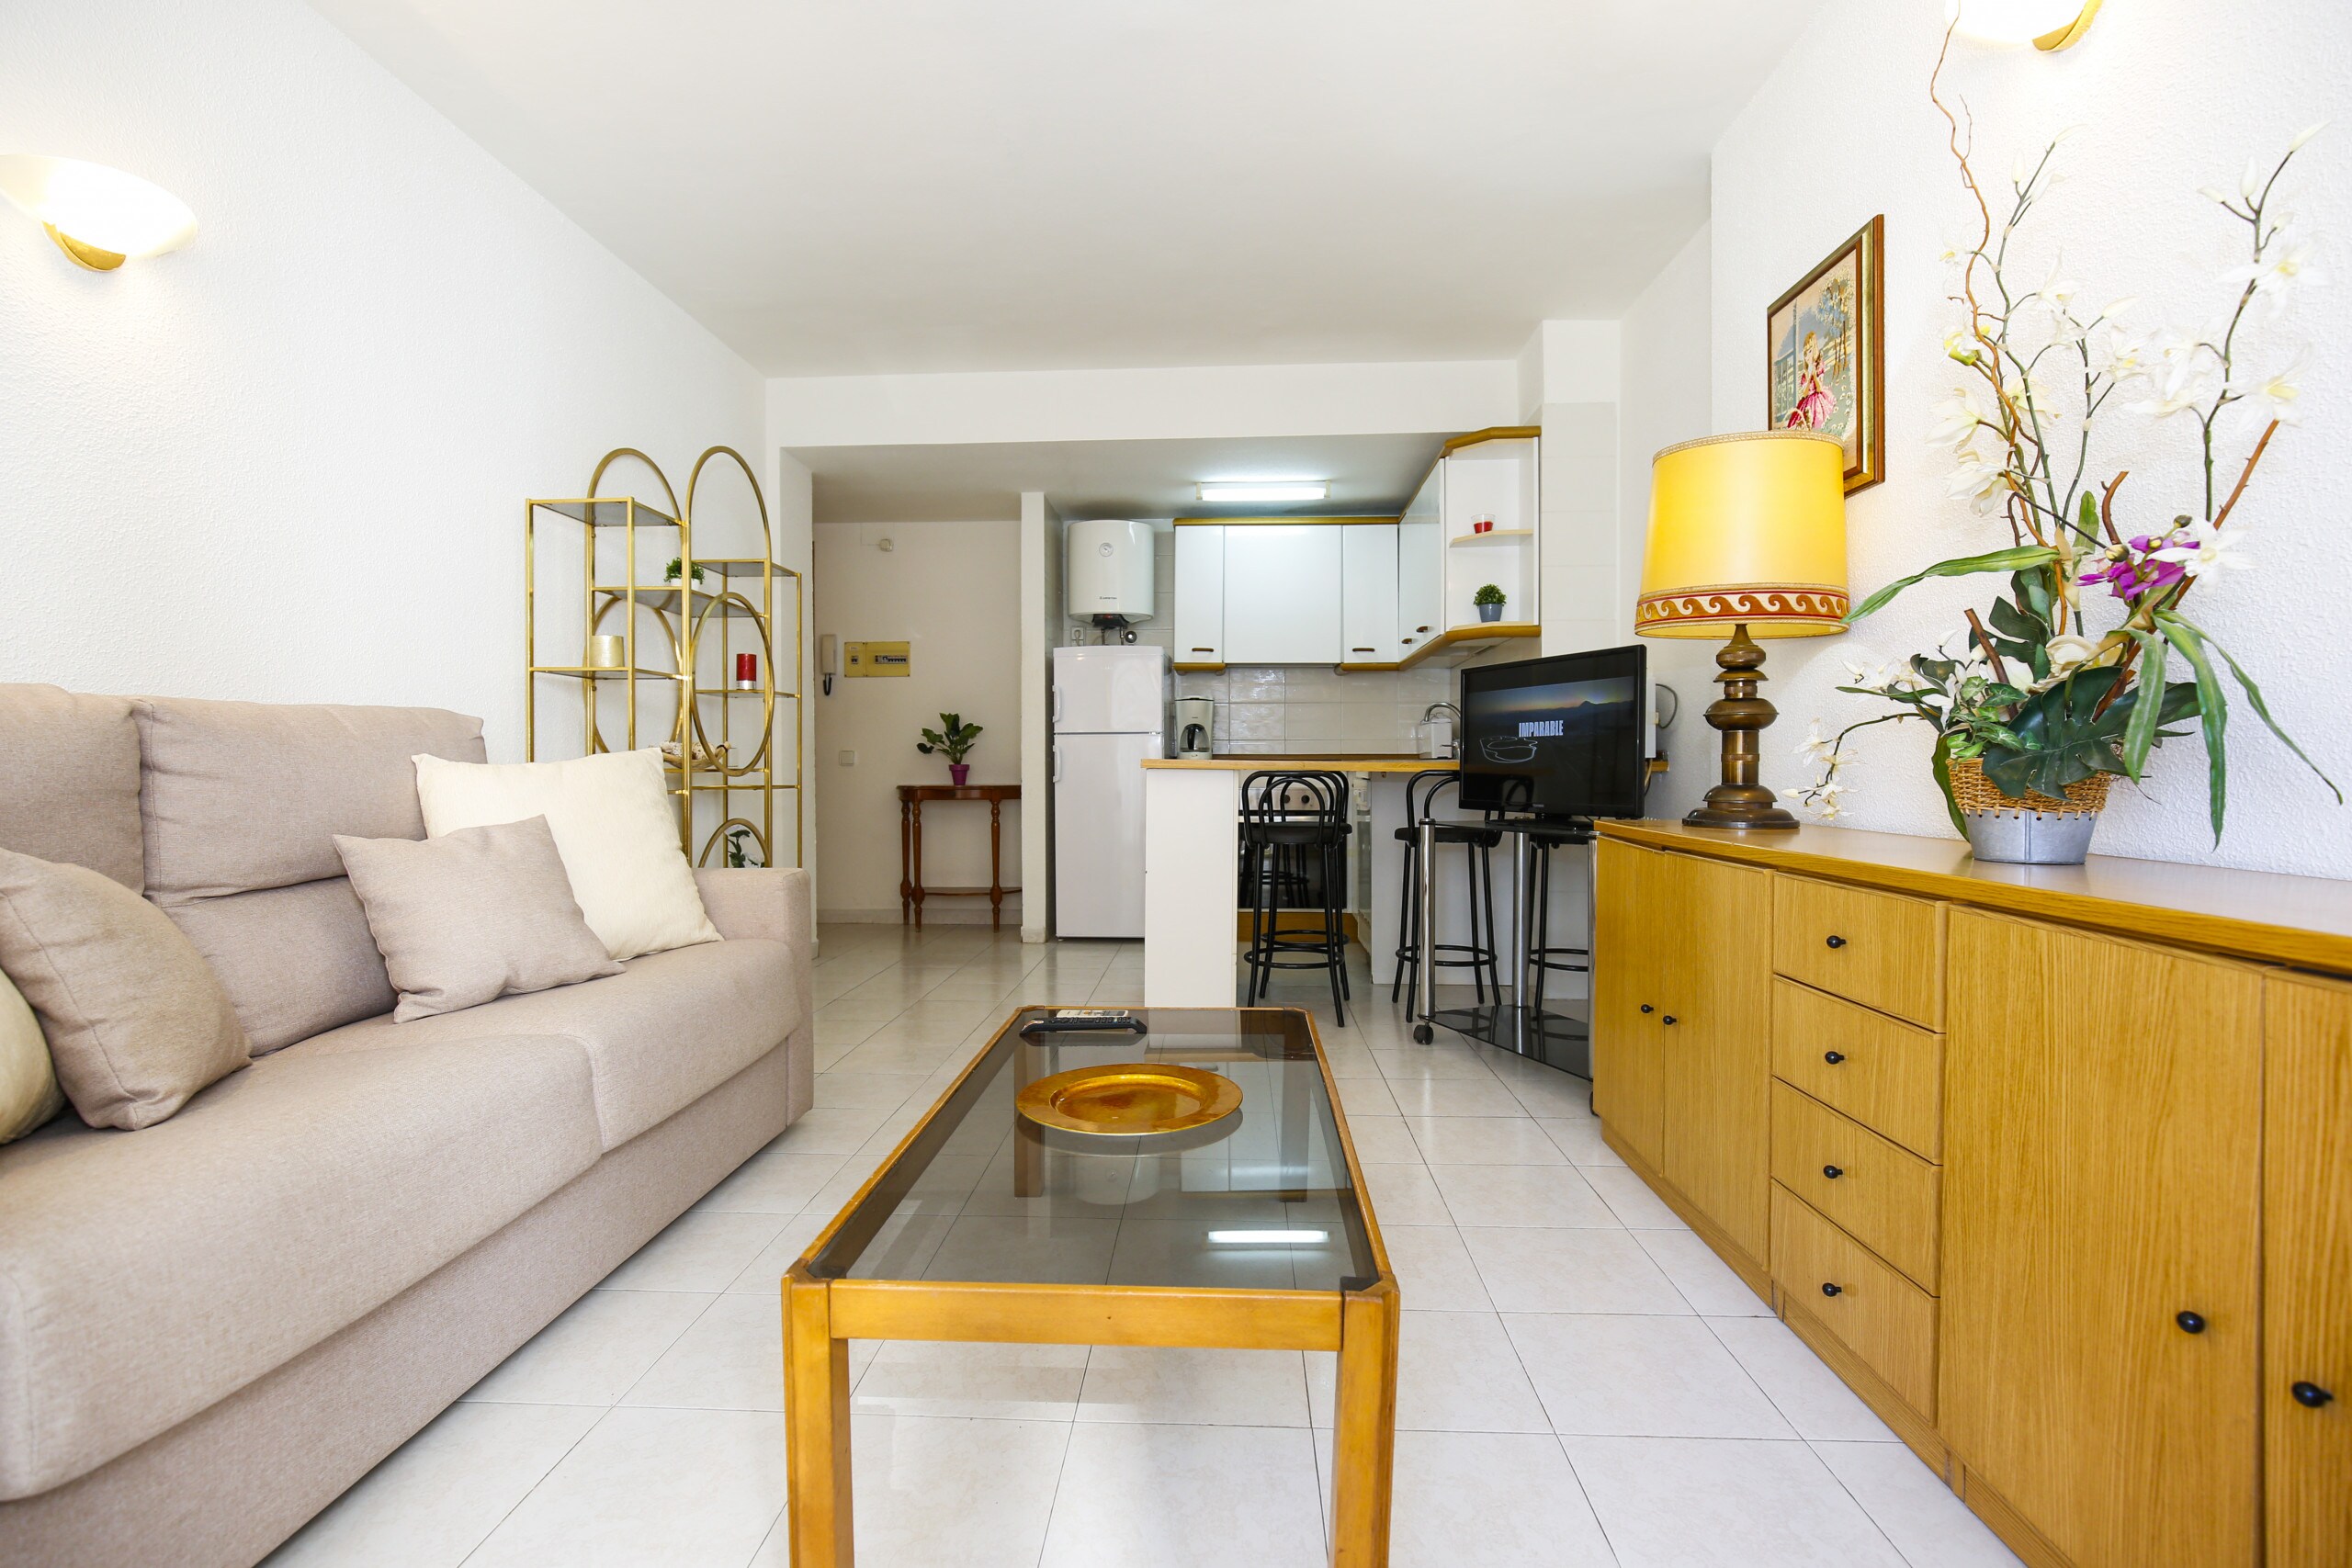 Property Image 1 - Lovely apartment located 50m from the beach in Cambrils